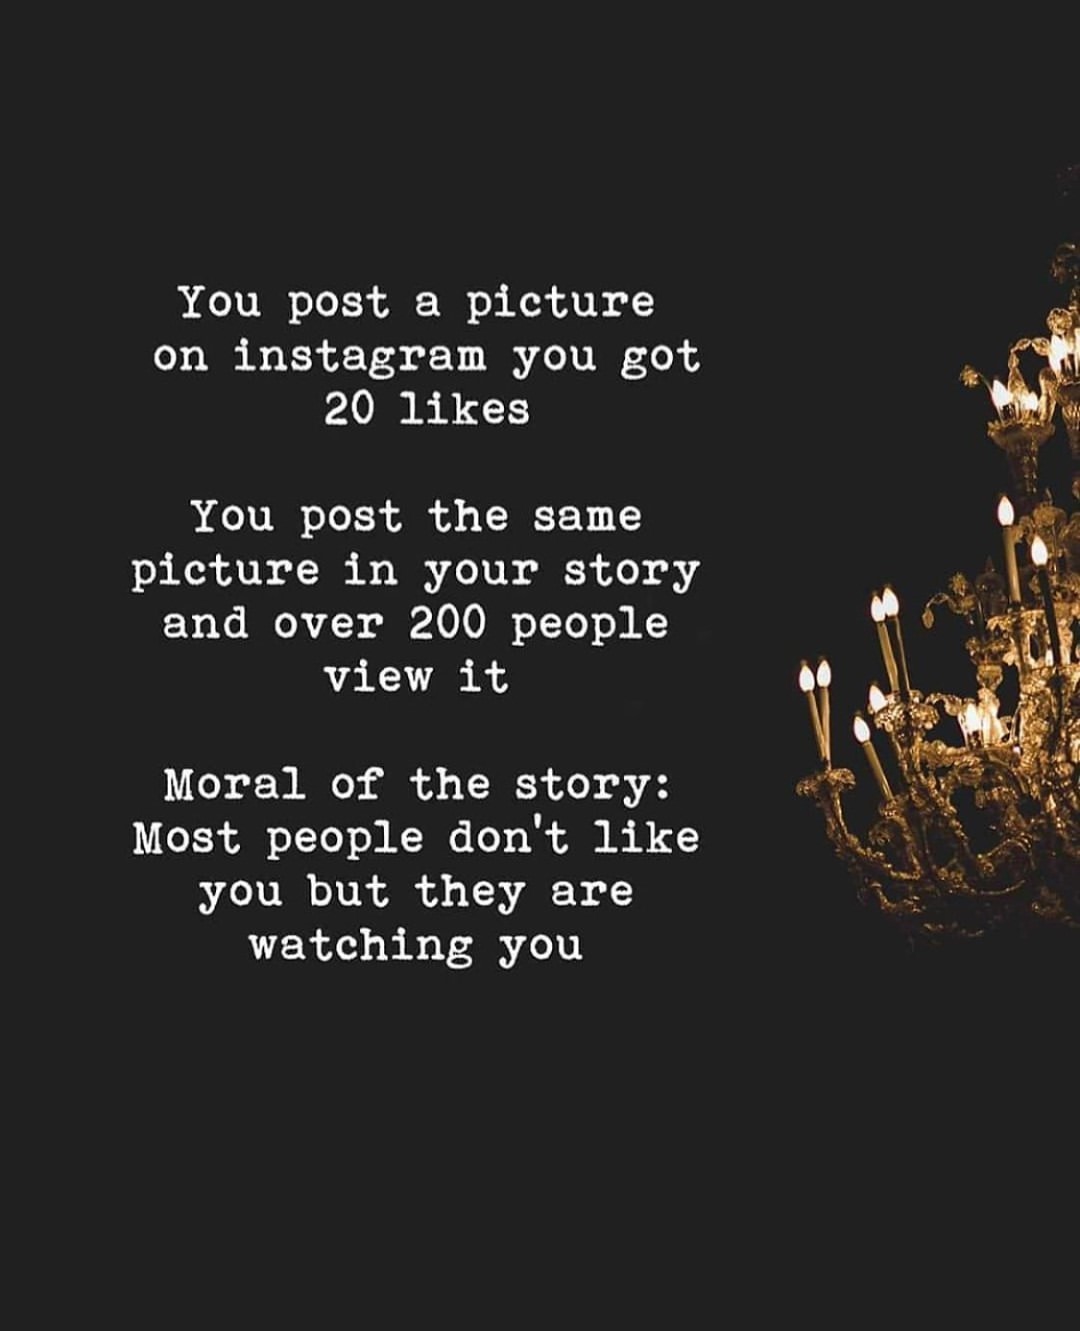 You post a picture on Instagram you got 20 likes. You post the same picture in your story and over 200 people view it. Moral of the story: Most people don't like you but they are watching you.